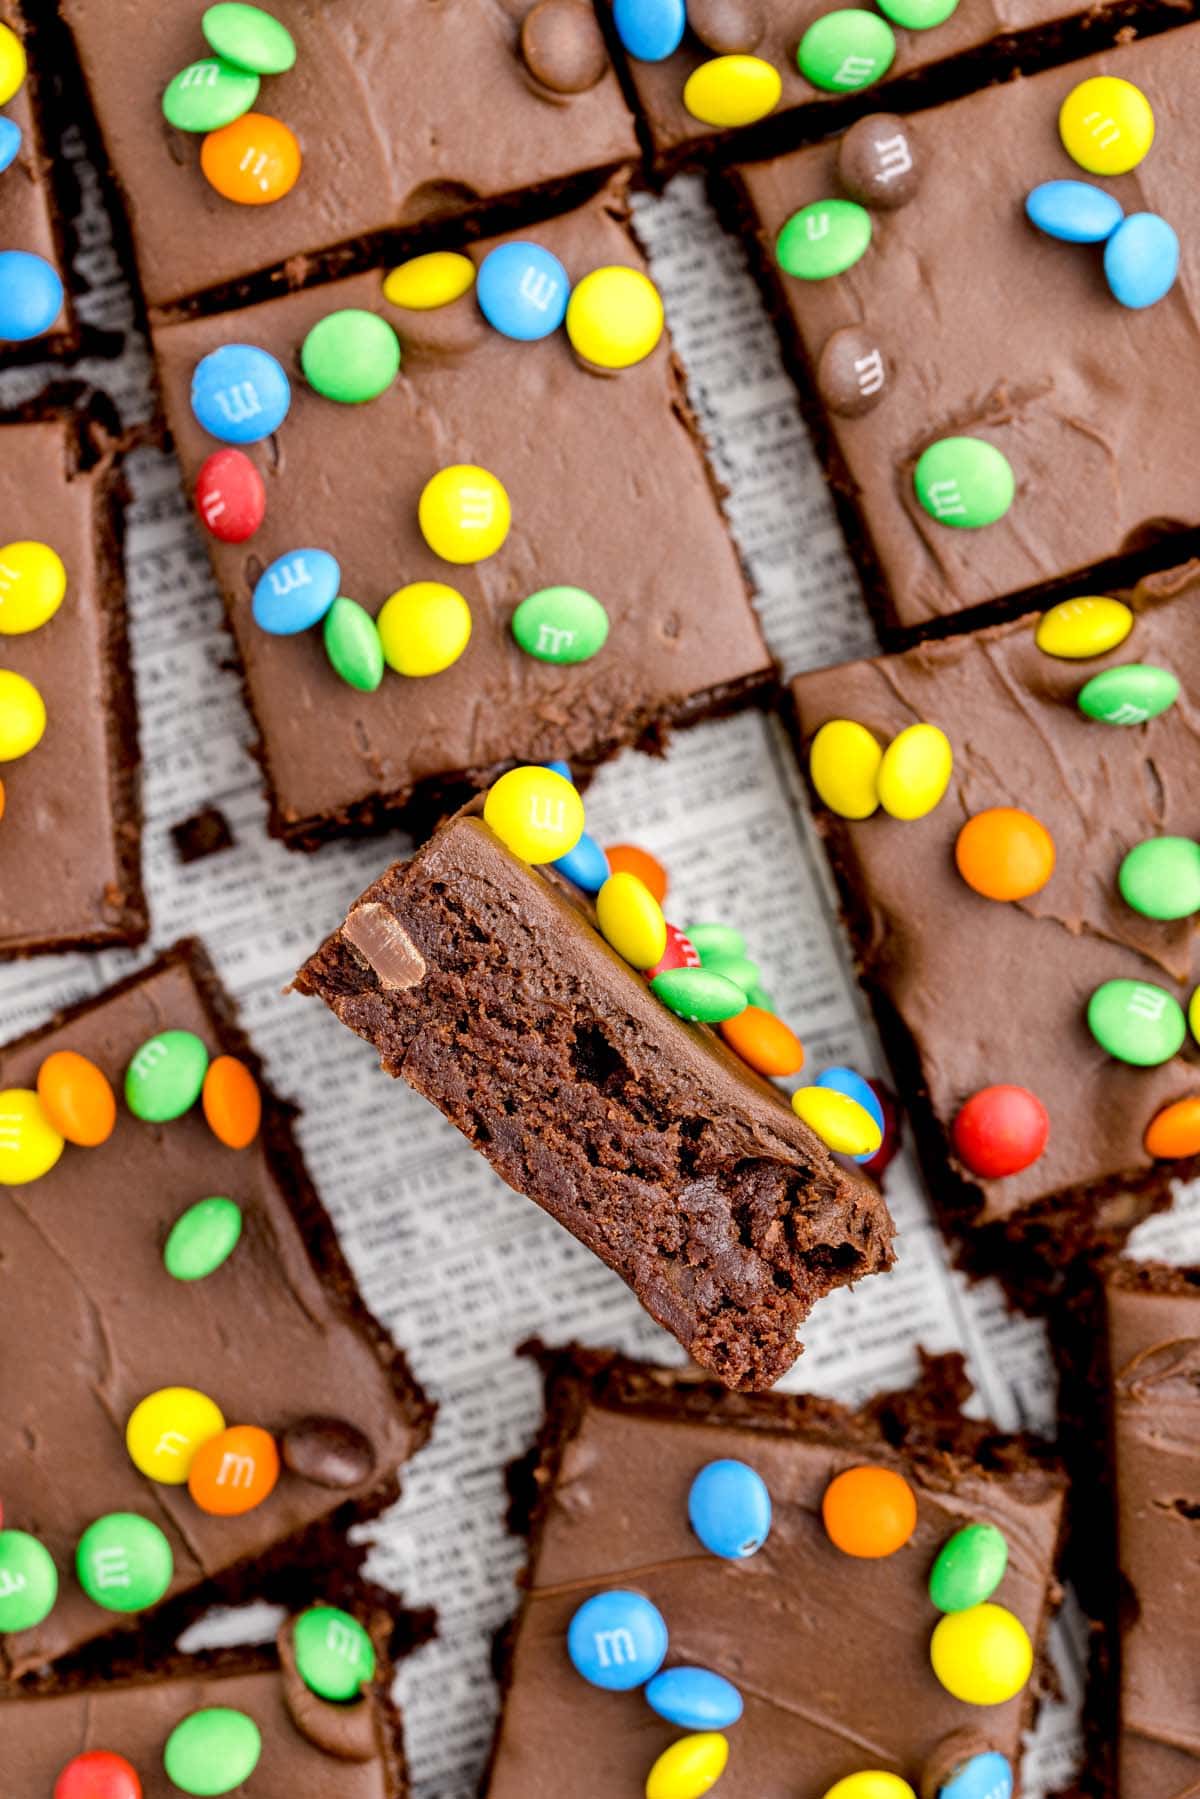 cosmic brownies with M&M's